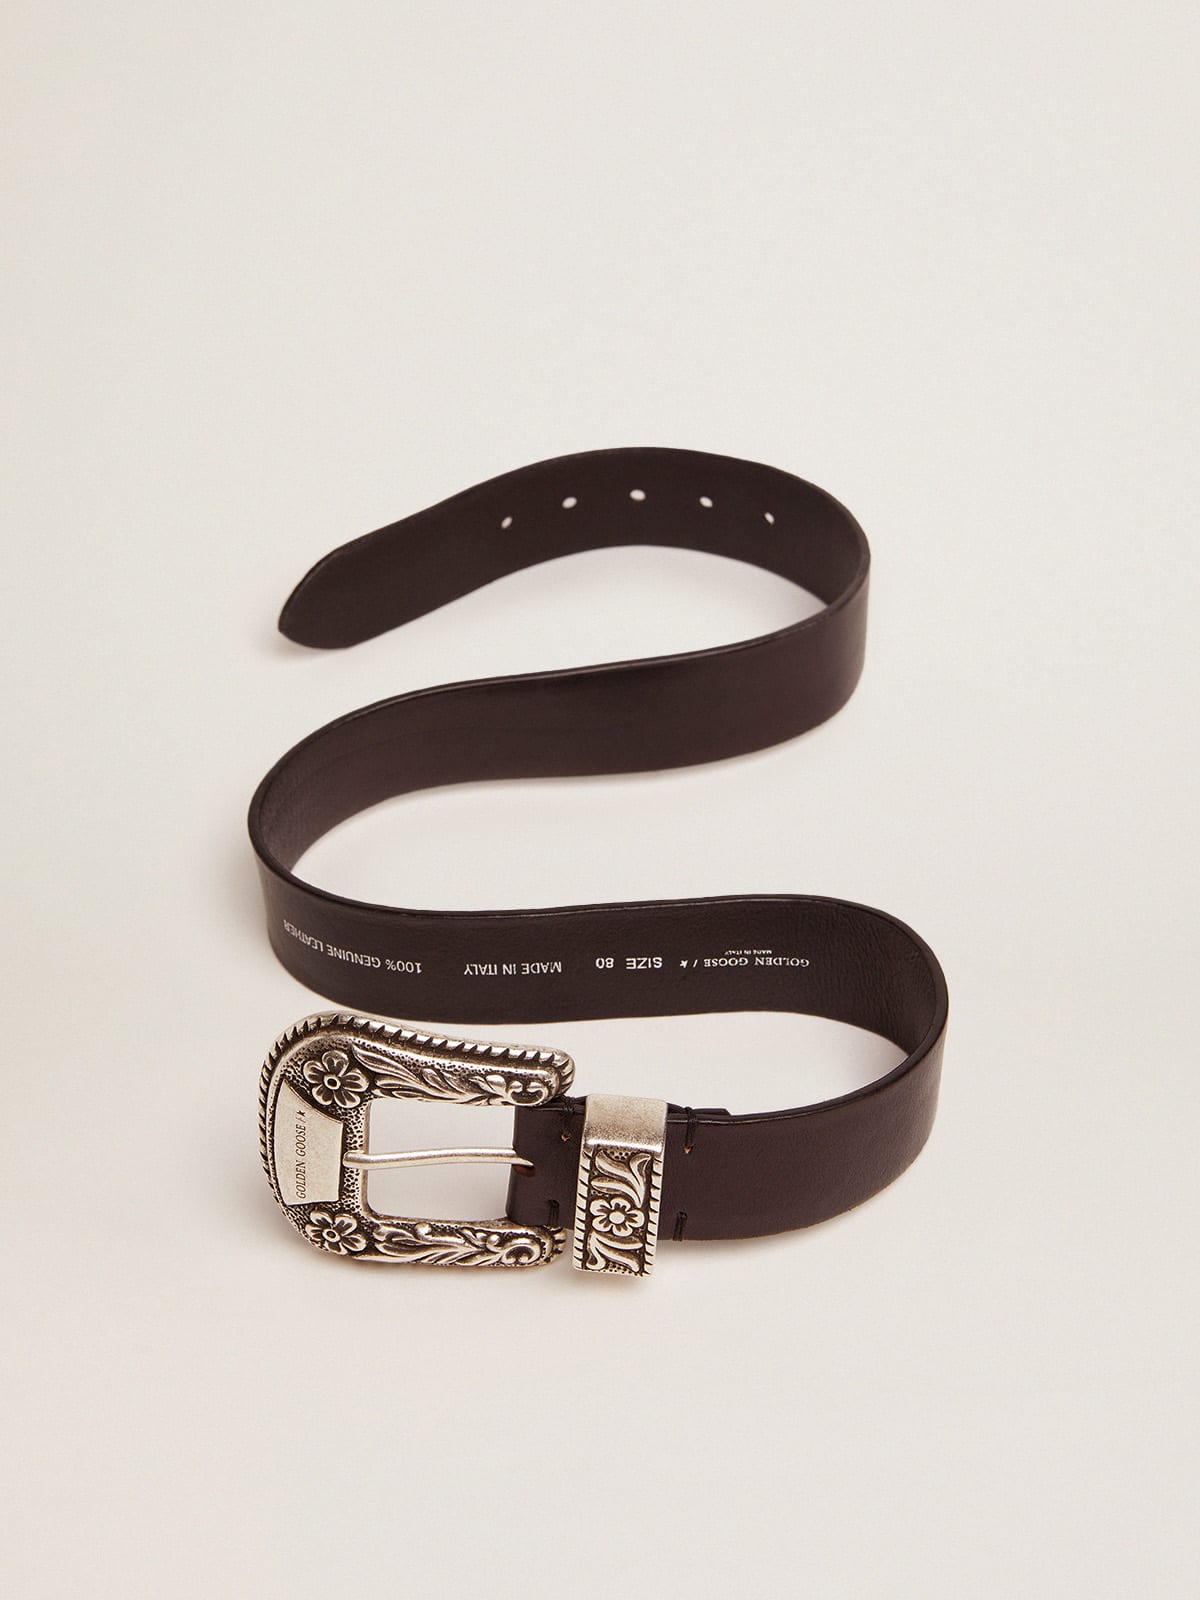 Golden Goose - Women's belt in black leather with silver decorated buckle in 